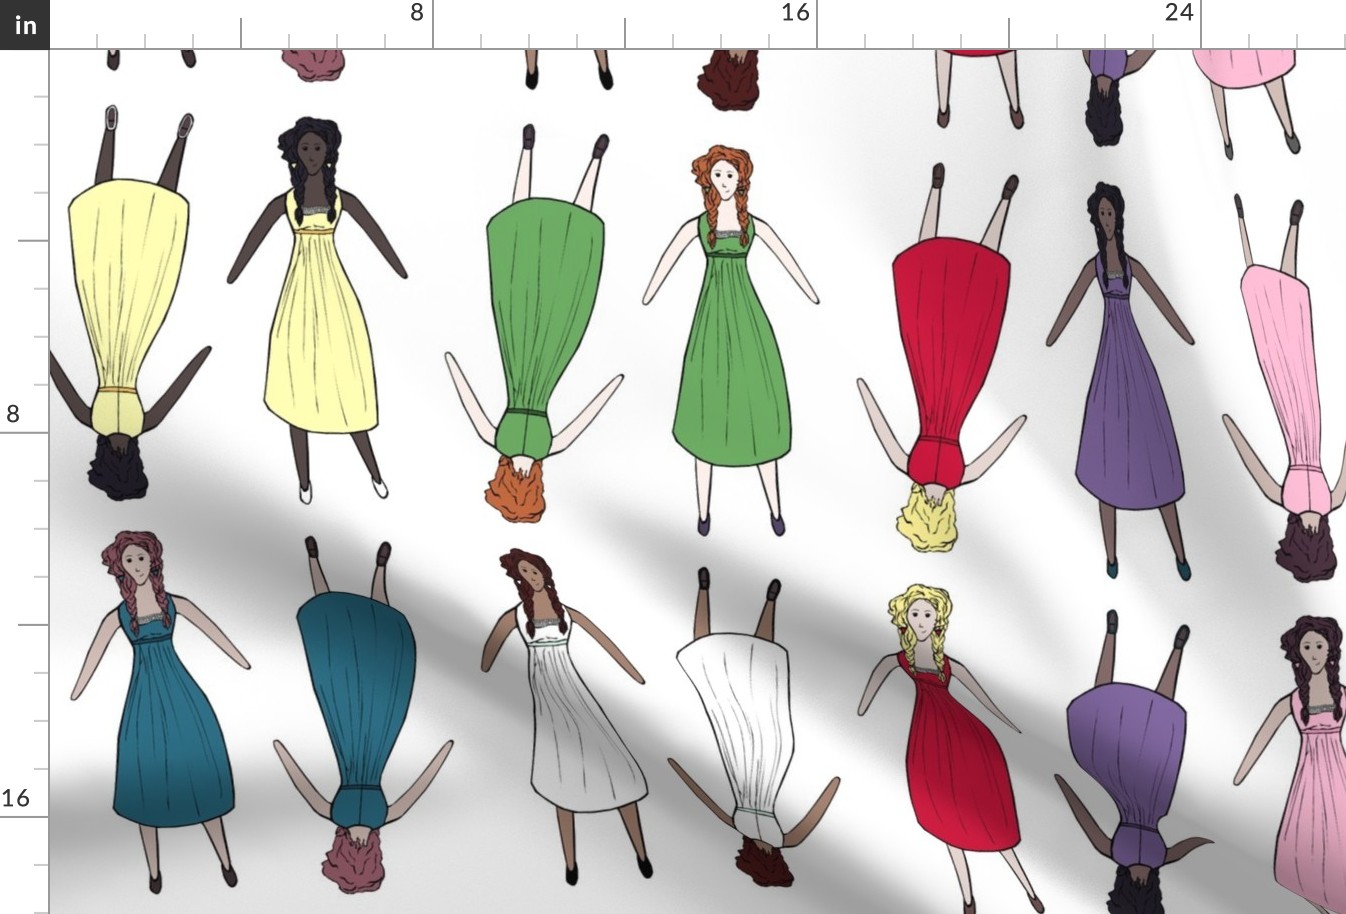 Doll in Seven Colors